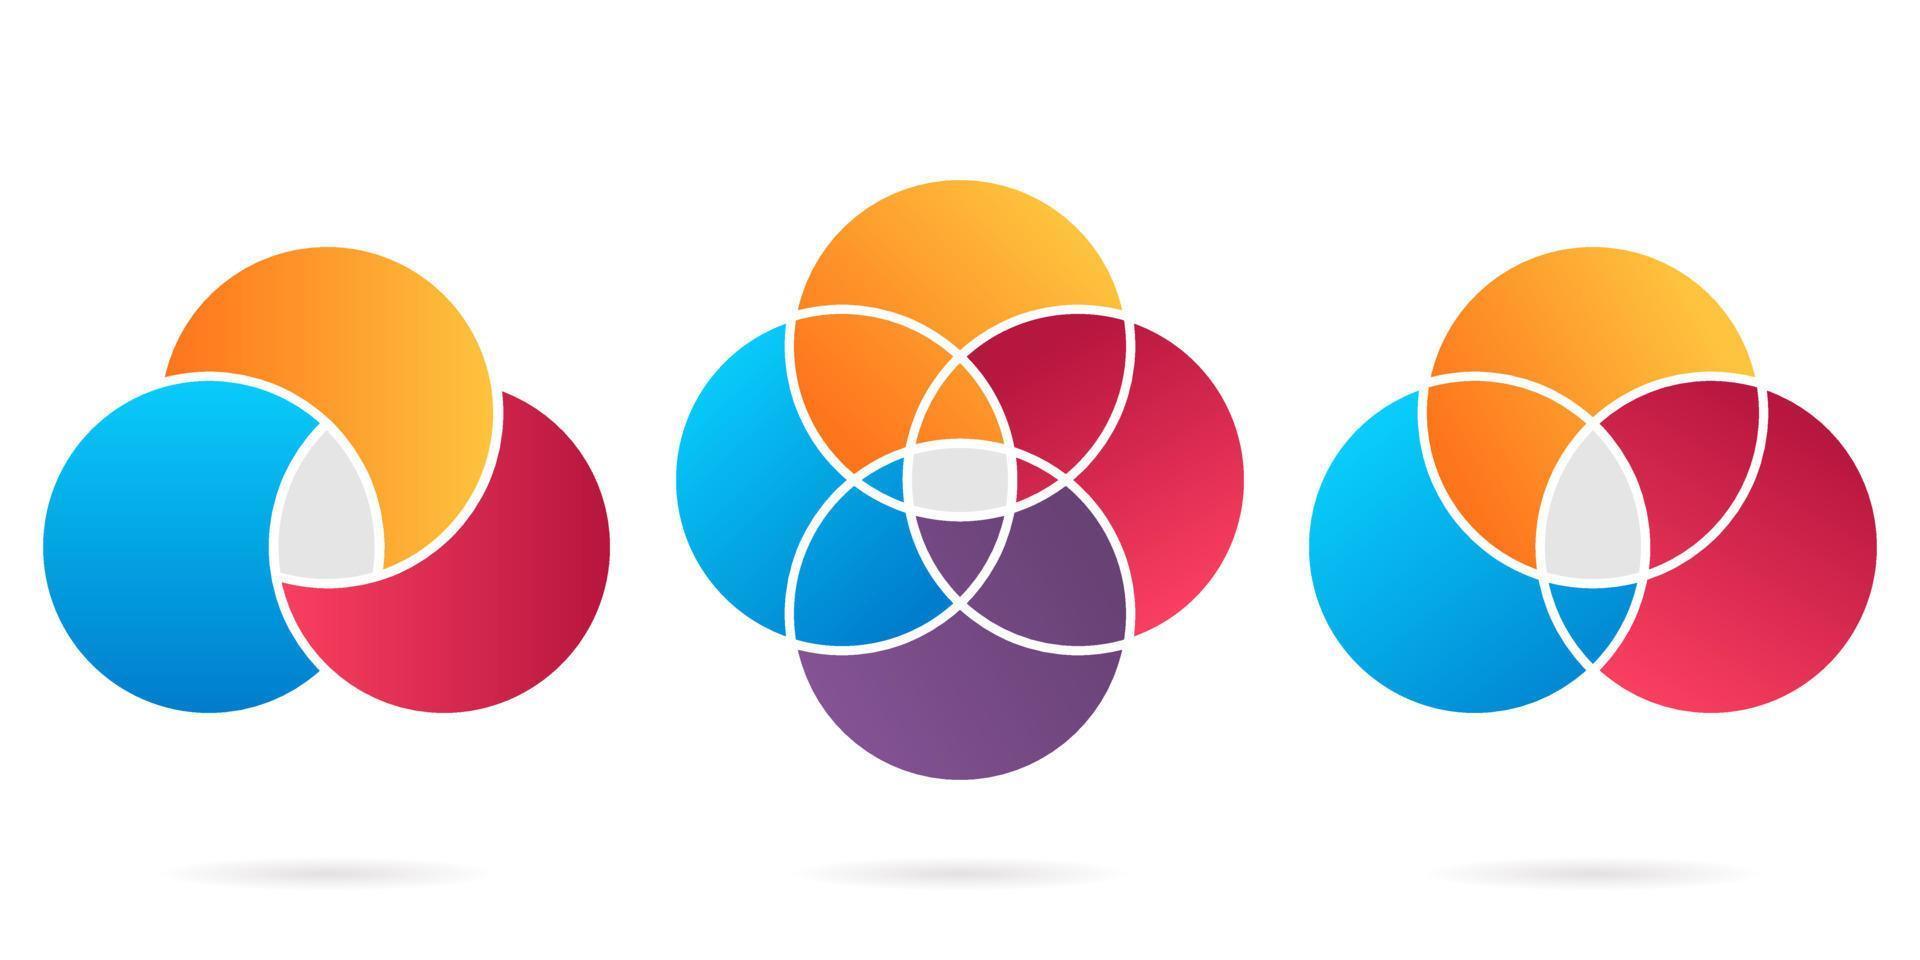 Venn Diagram Color Round Set. Three, Four Intersected Circle Infographic. 3, 4 Circles Chart Concept. Diagram Venn. Circular Empty Schema. Framework Business Graphic. Isolated Vector Illustration.